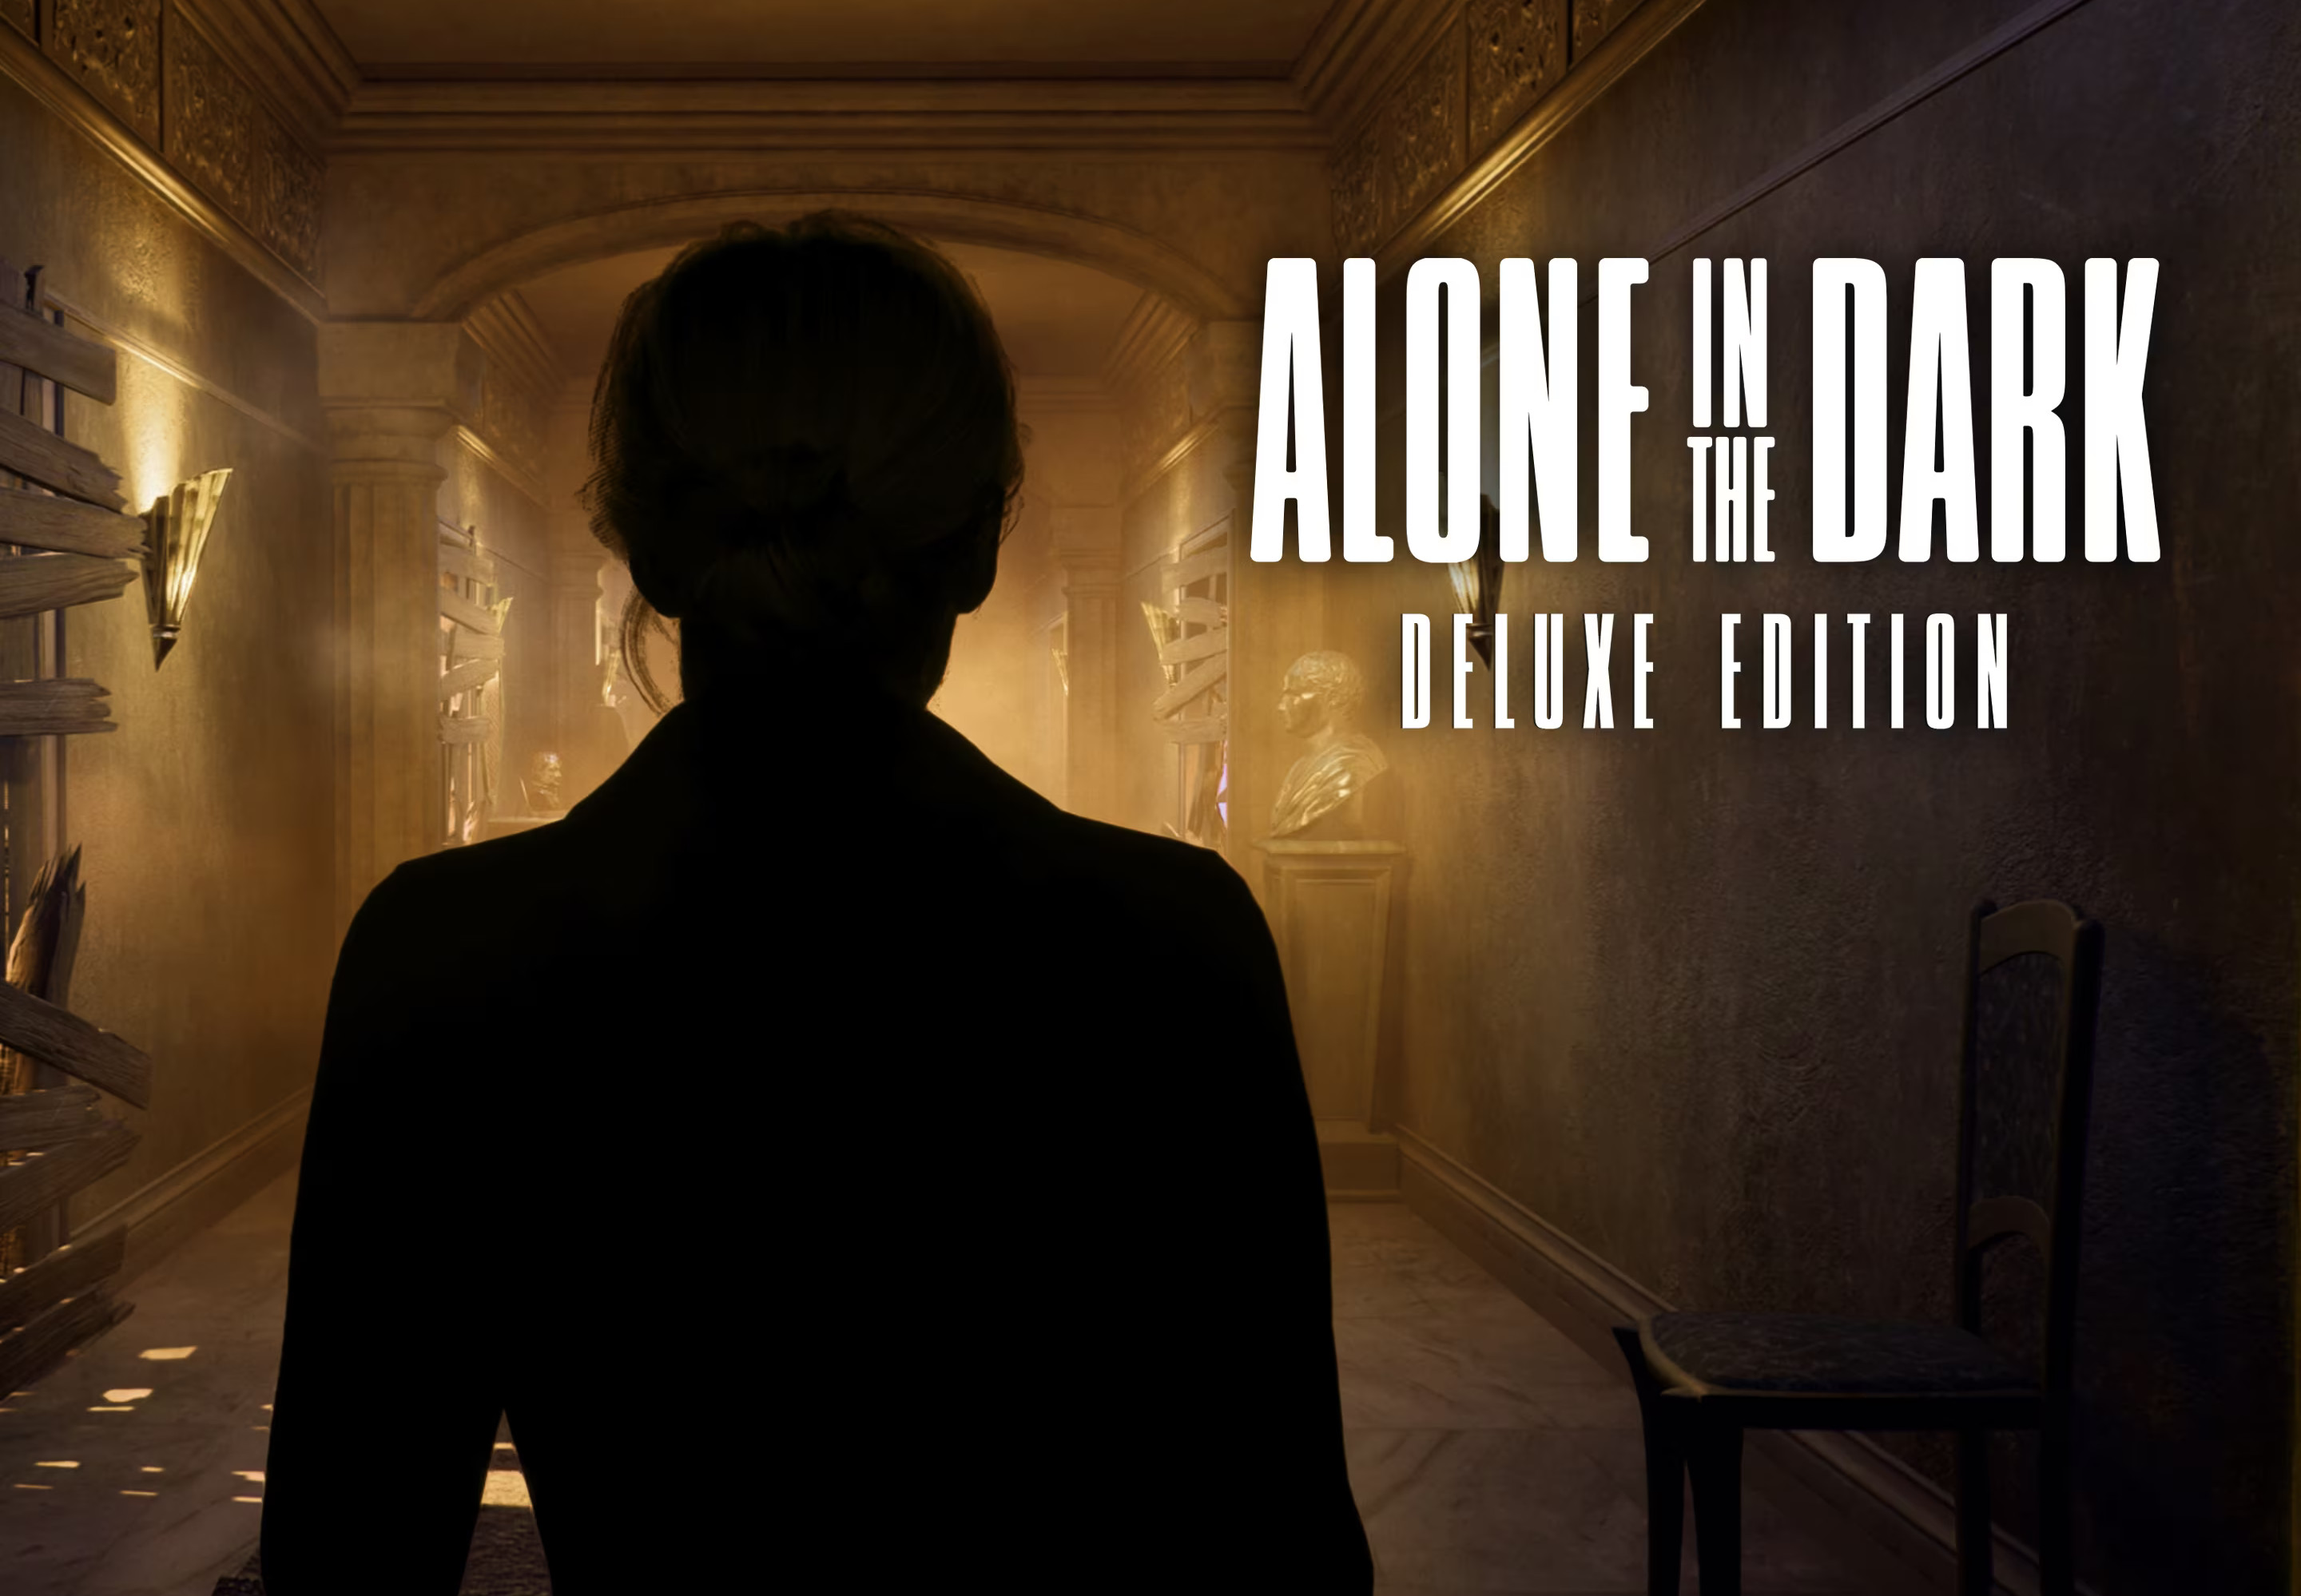 Alone In The Dark Deluxe Edition PRE-ORDER AR XBOX One / Xbox Series X,S CD Key